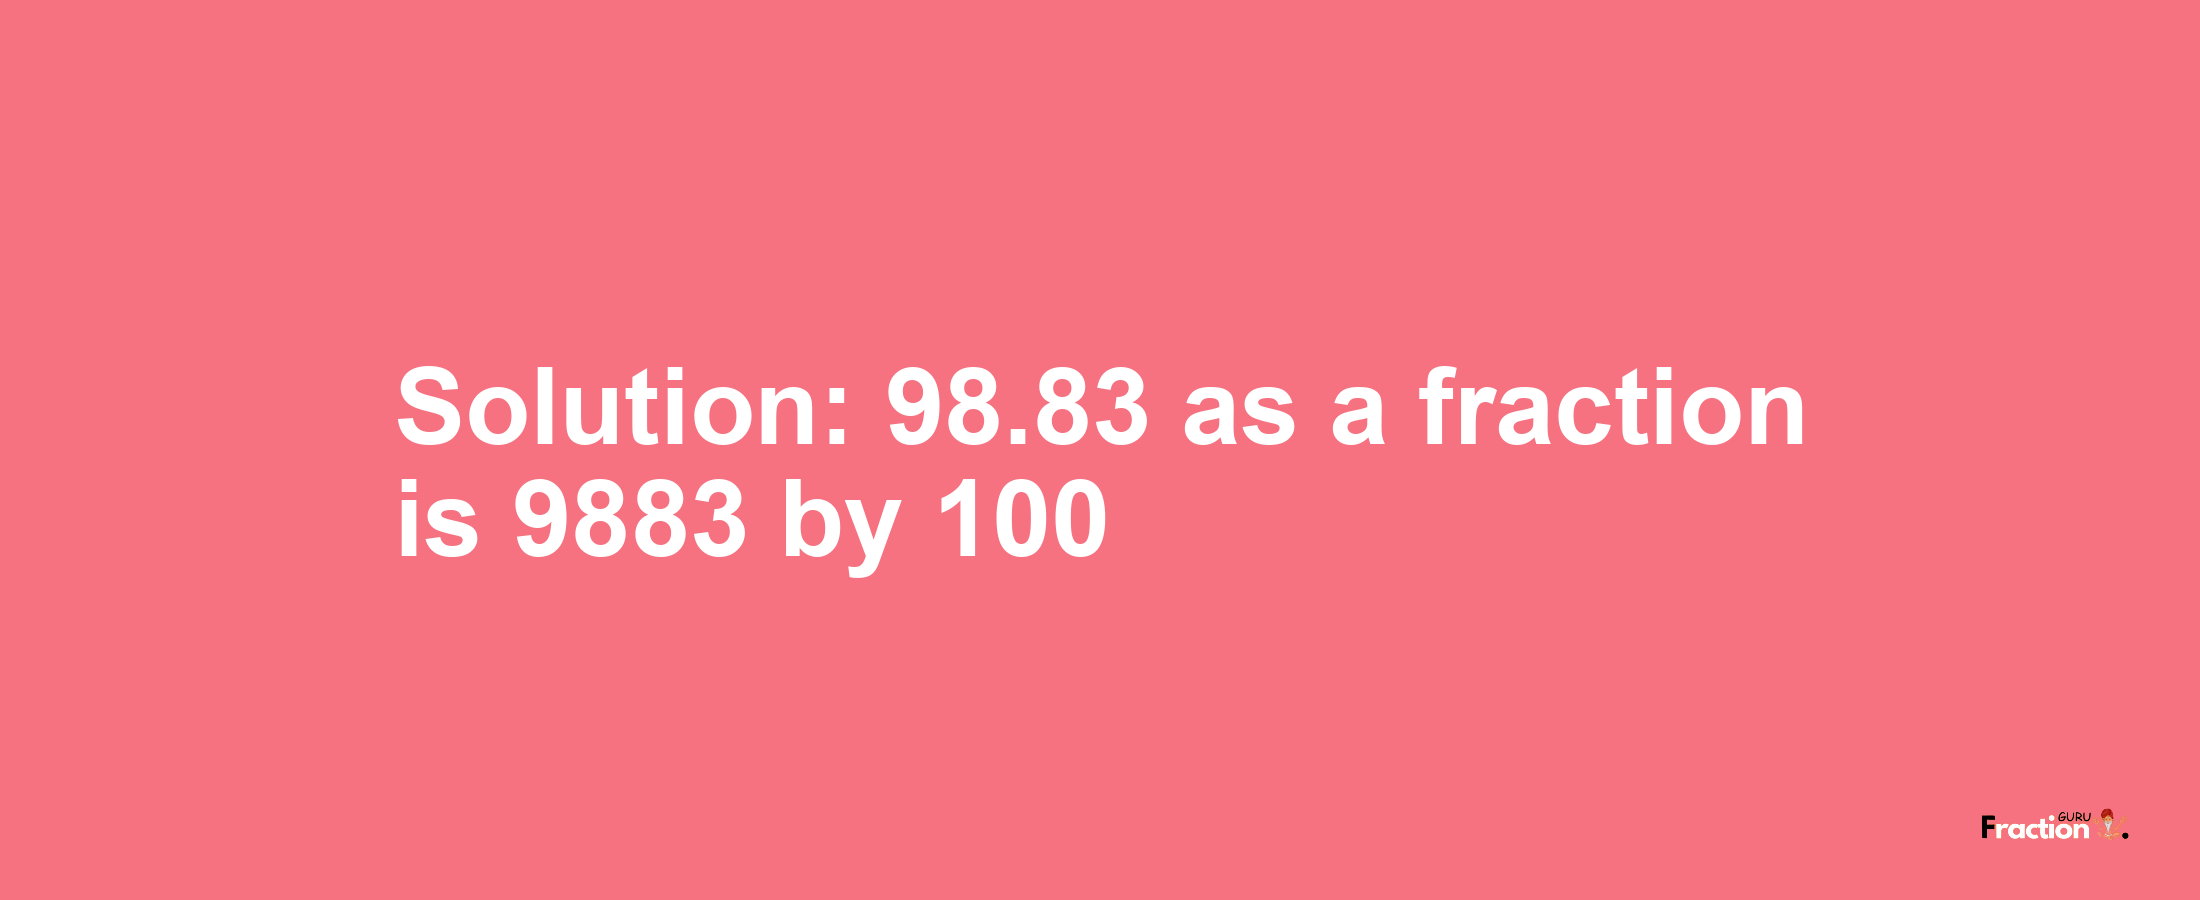 Solution:98.83 as a fraction is 9883/100